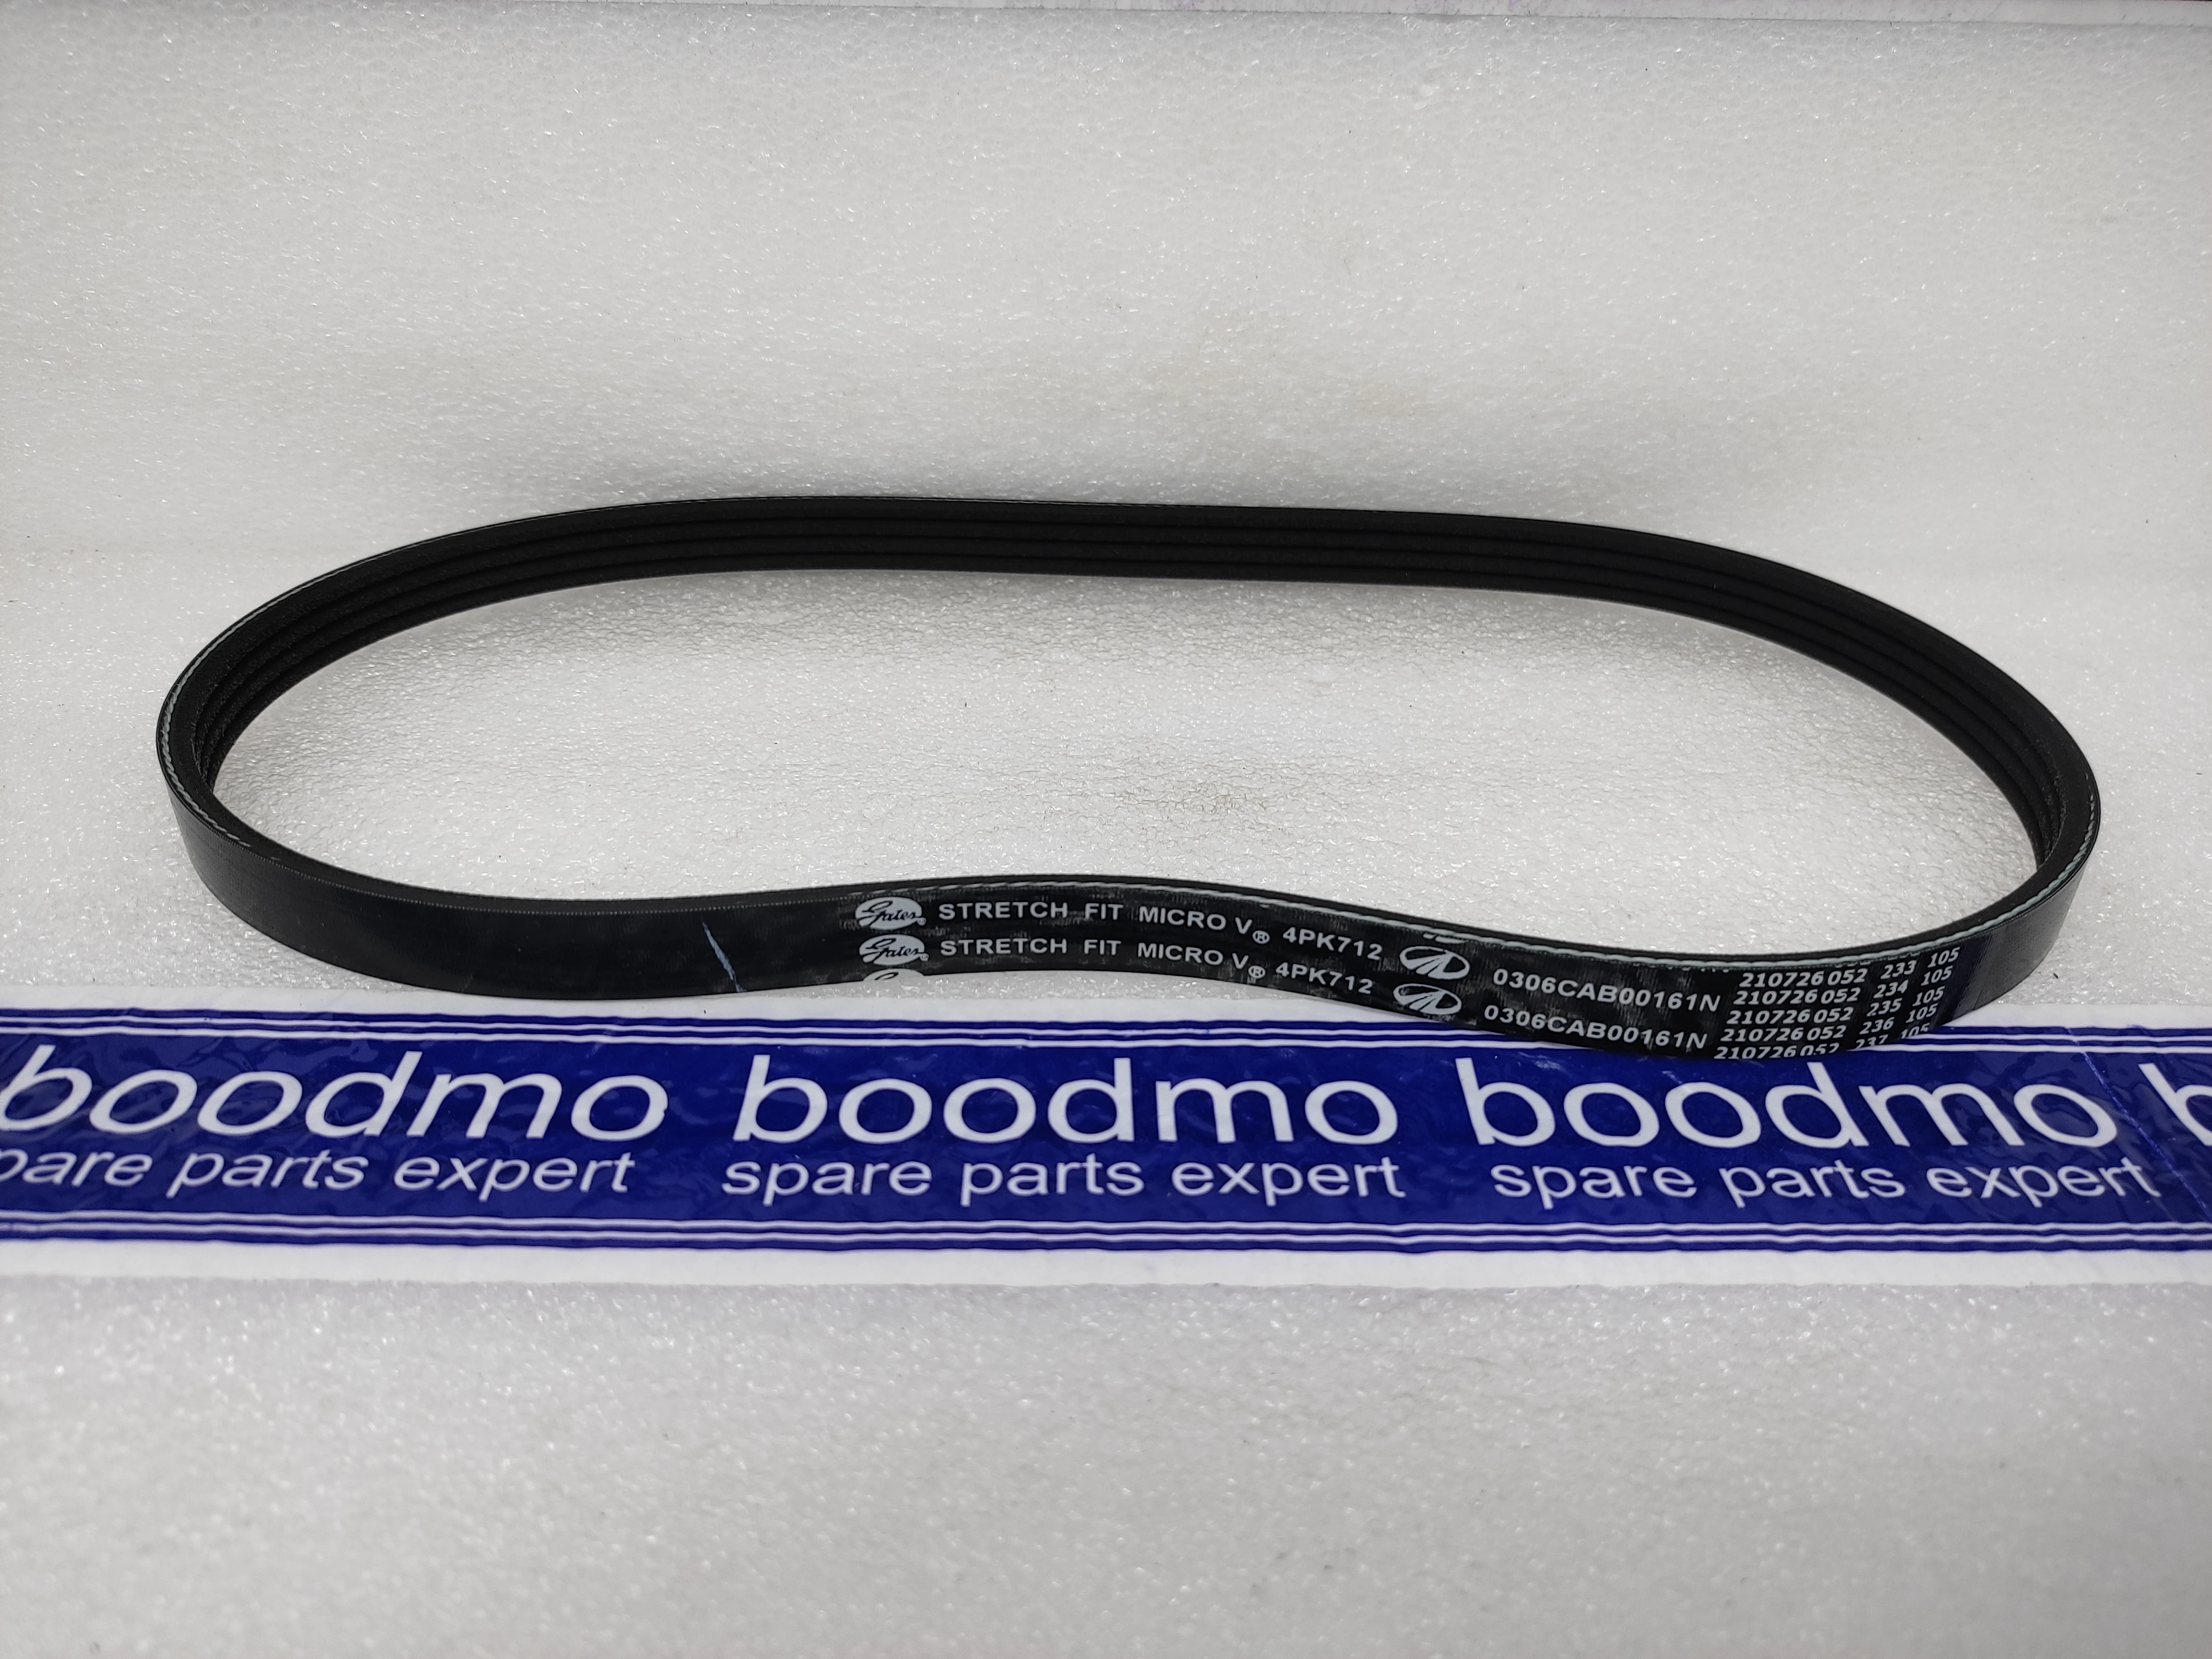 BELT POWER STEERING: MAHINDRA 0306C0161N -compatibility, features,  prices. boodmo